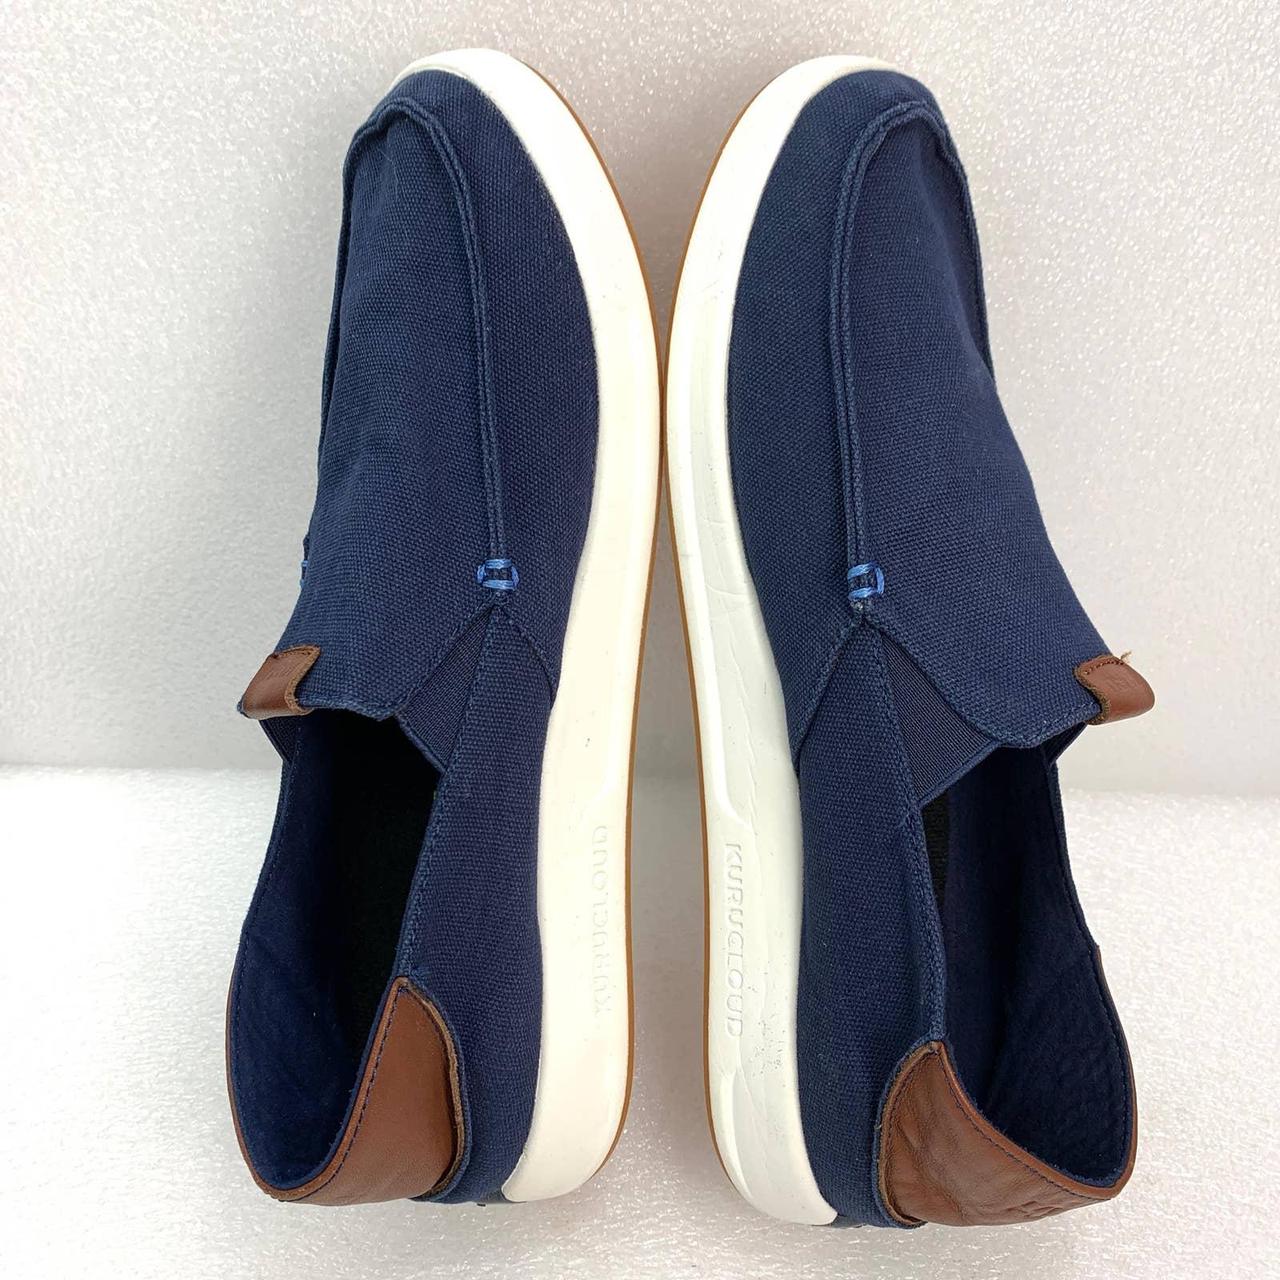 KURU Pace Loafers Casual Shoes in Canvas Blue Size... - Depop